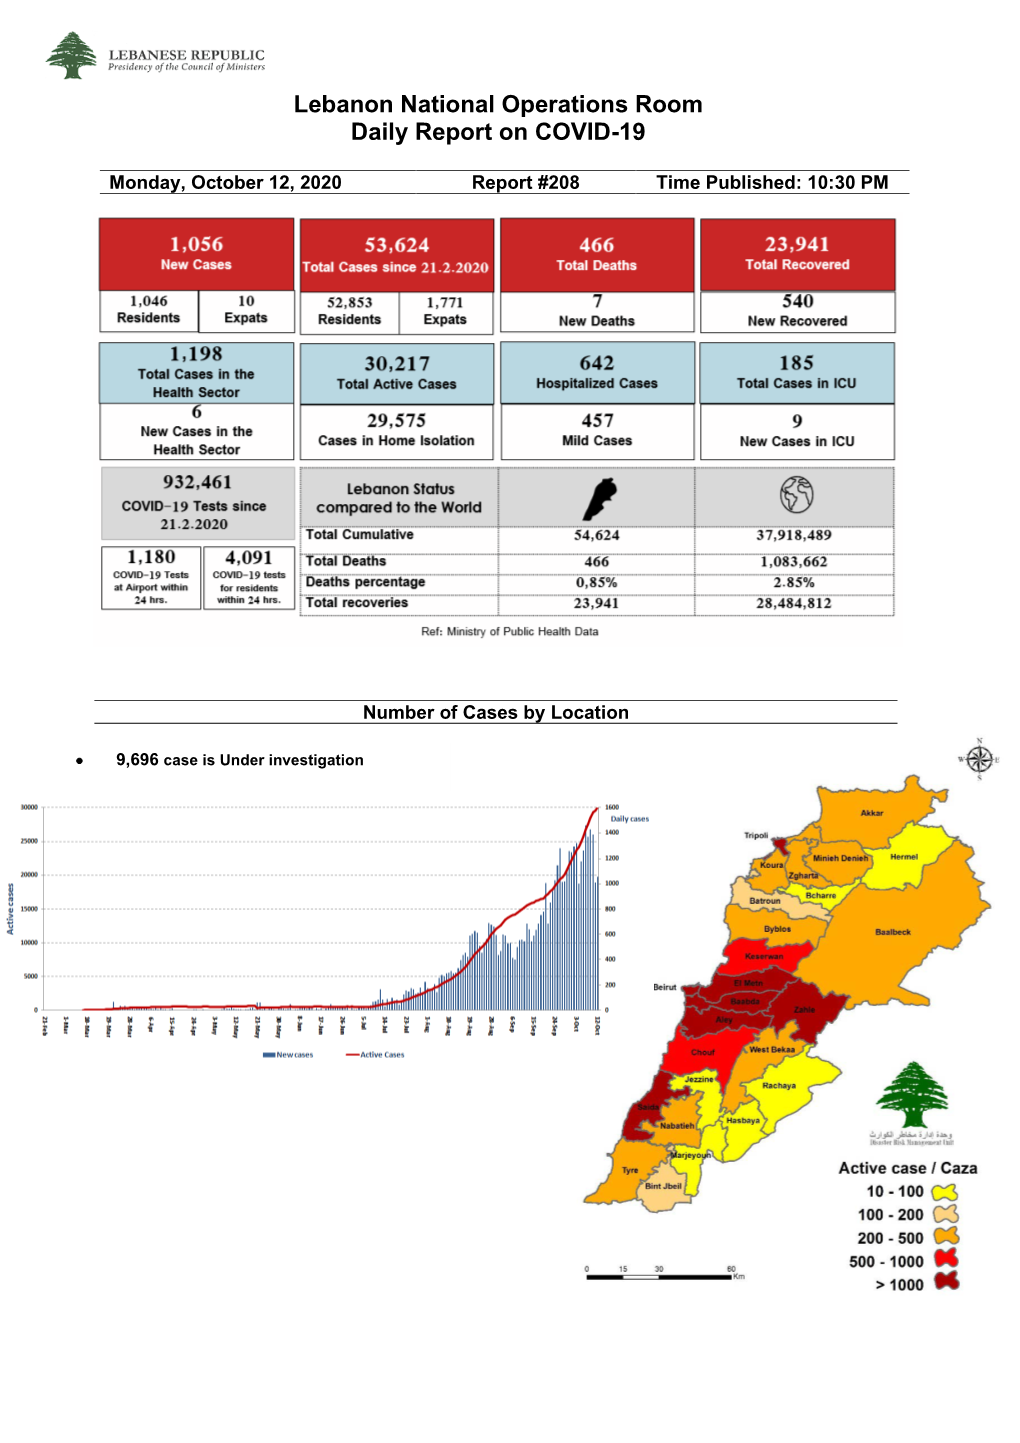 Lebanon National Operations Room Daily Report on COVID-19